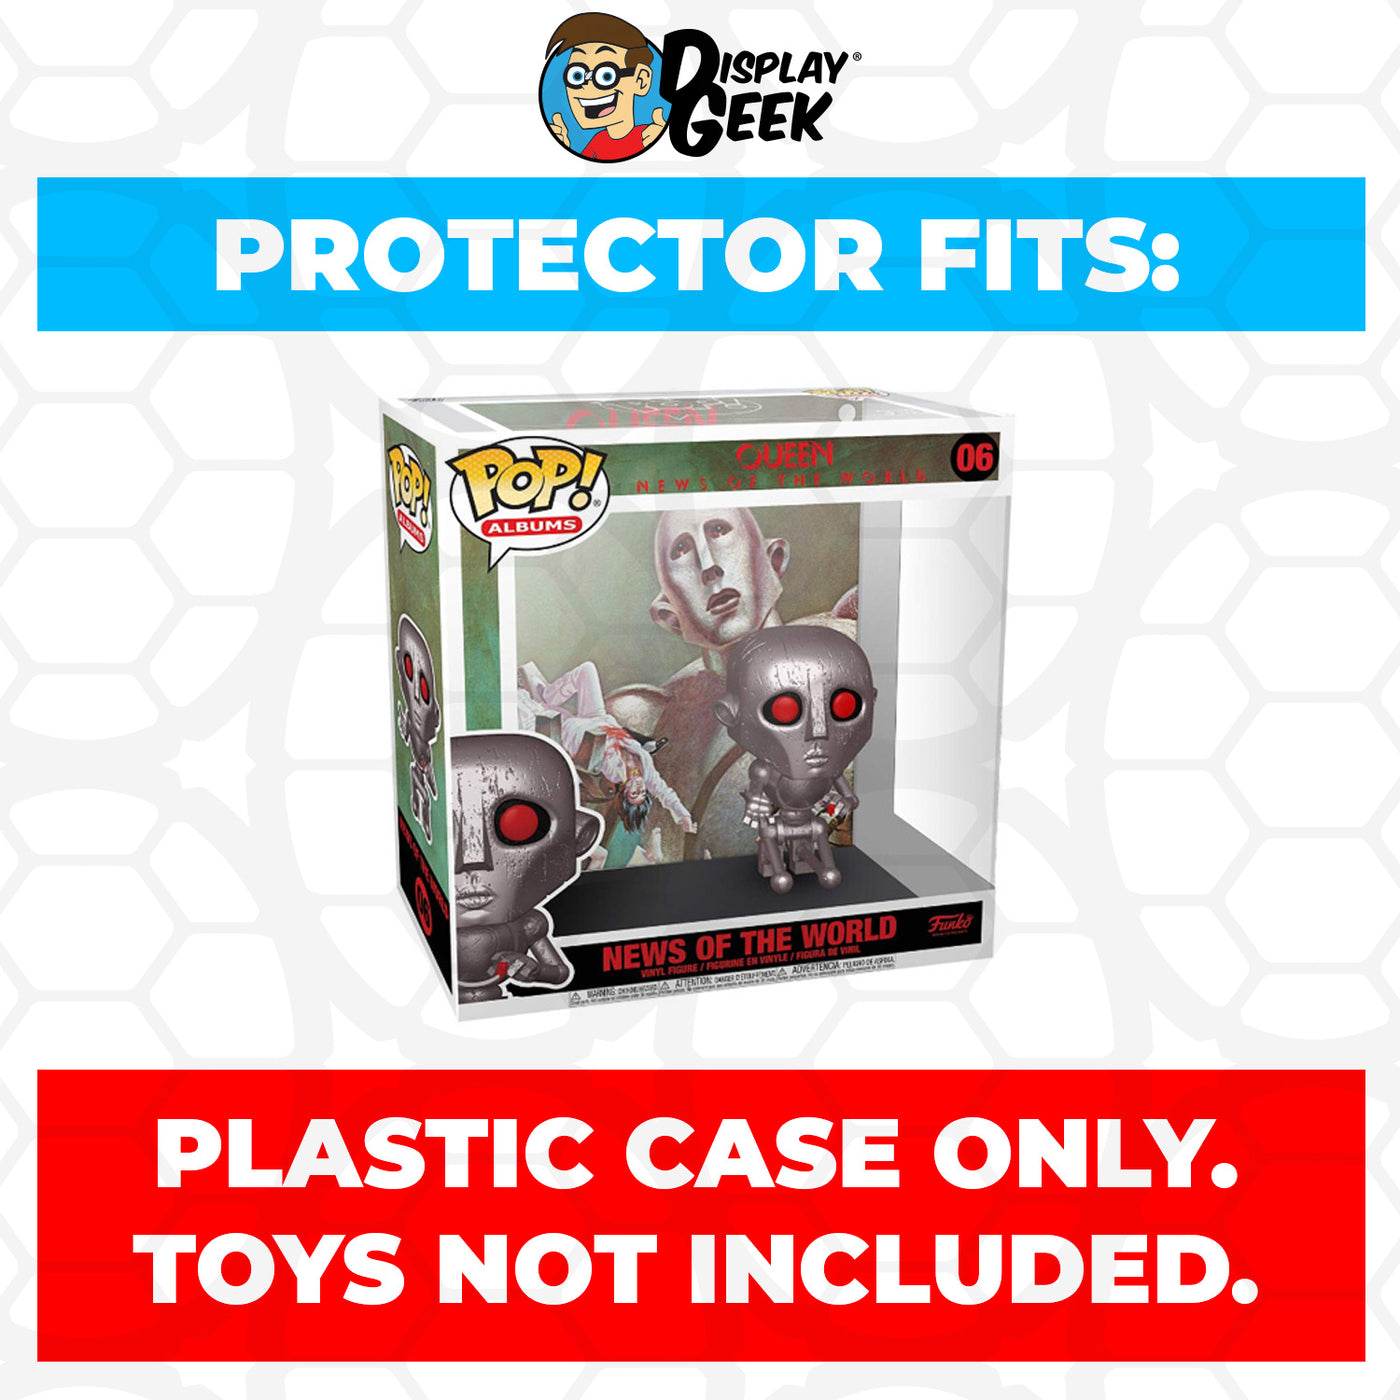 Pop Protector for Queen News of the World #06 Funko Pop Albums on The Protector Guide App by Display Geek